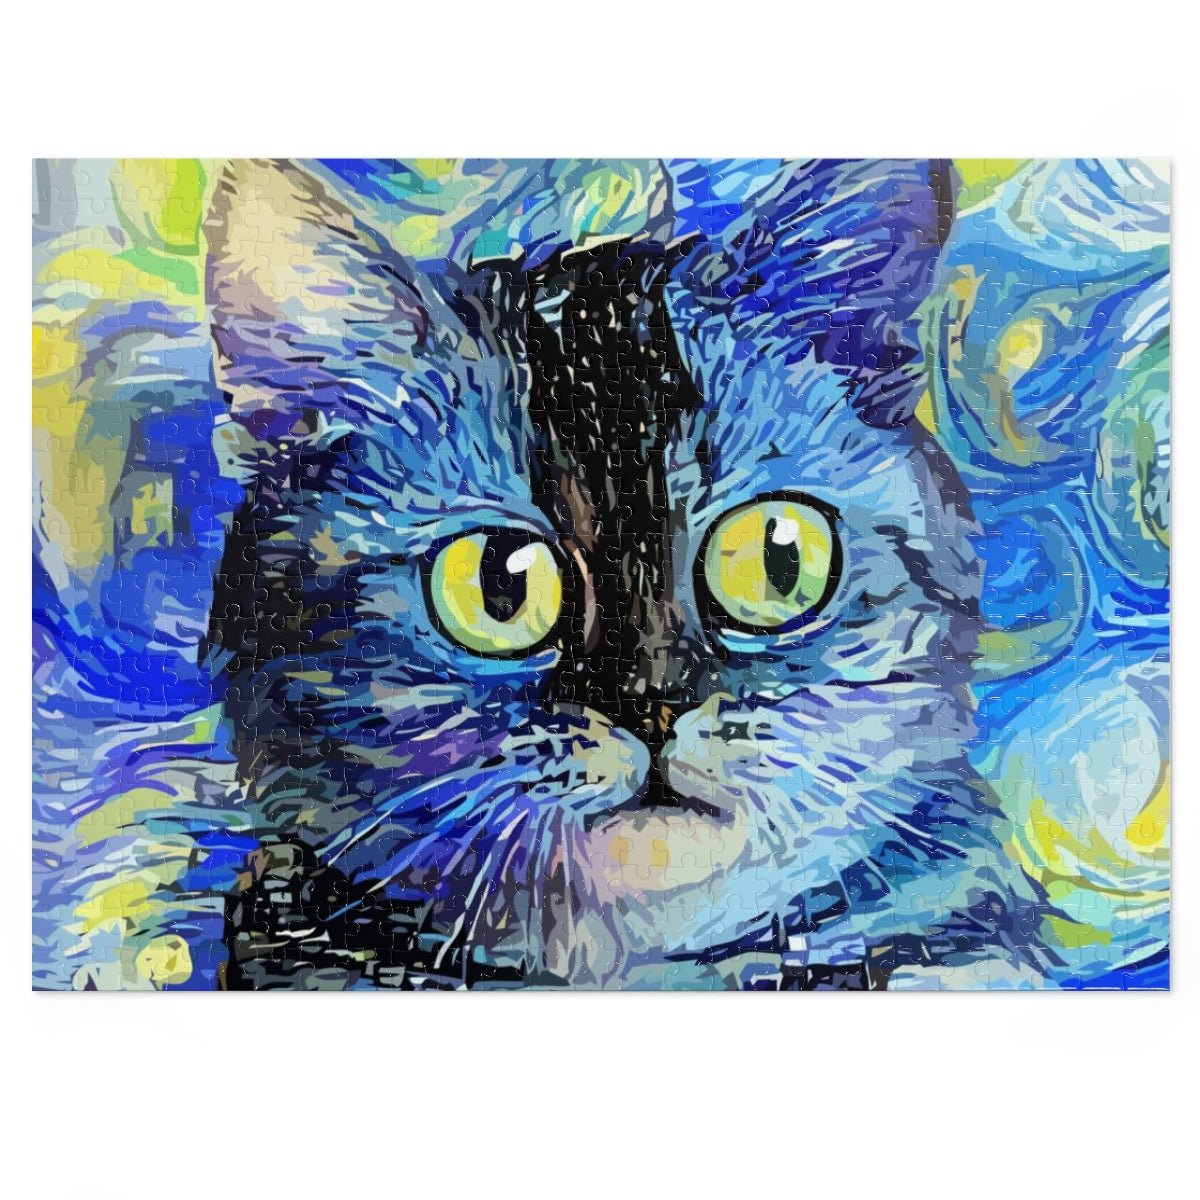 Serious Cat Jigsaw Puzzle (30, 110, 252, 500,1000-Piece) - Puffin Lime